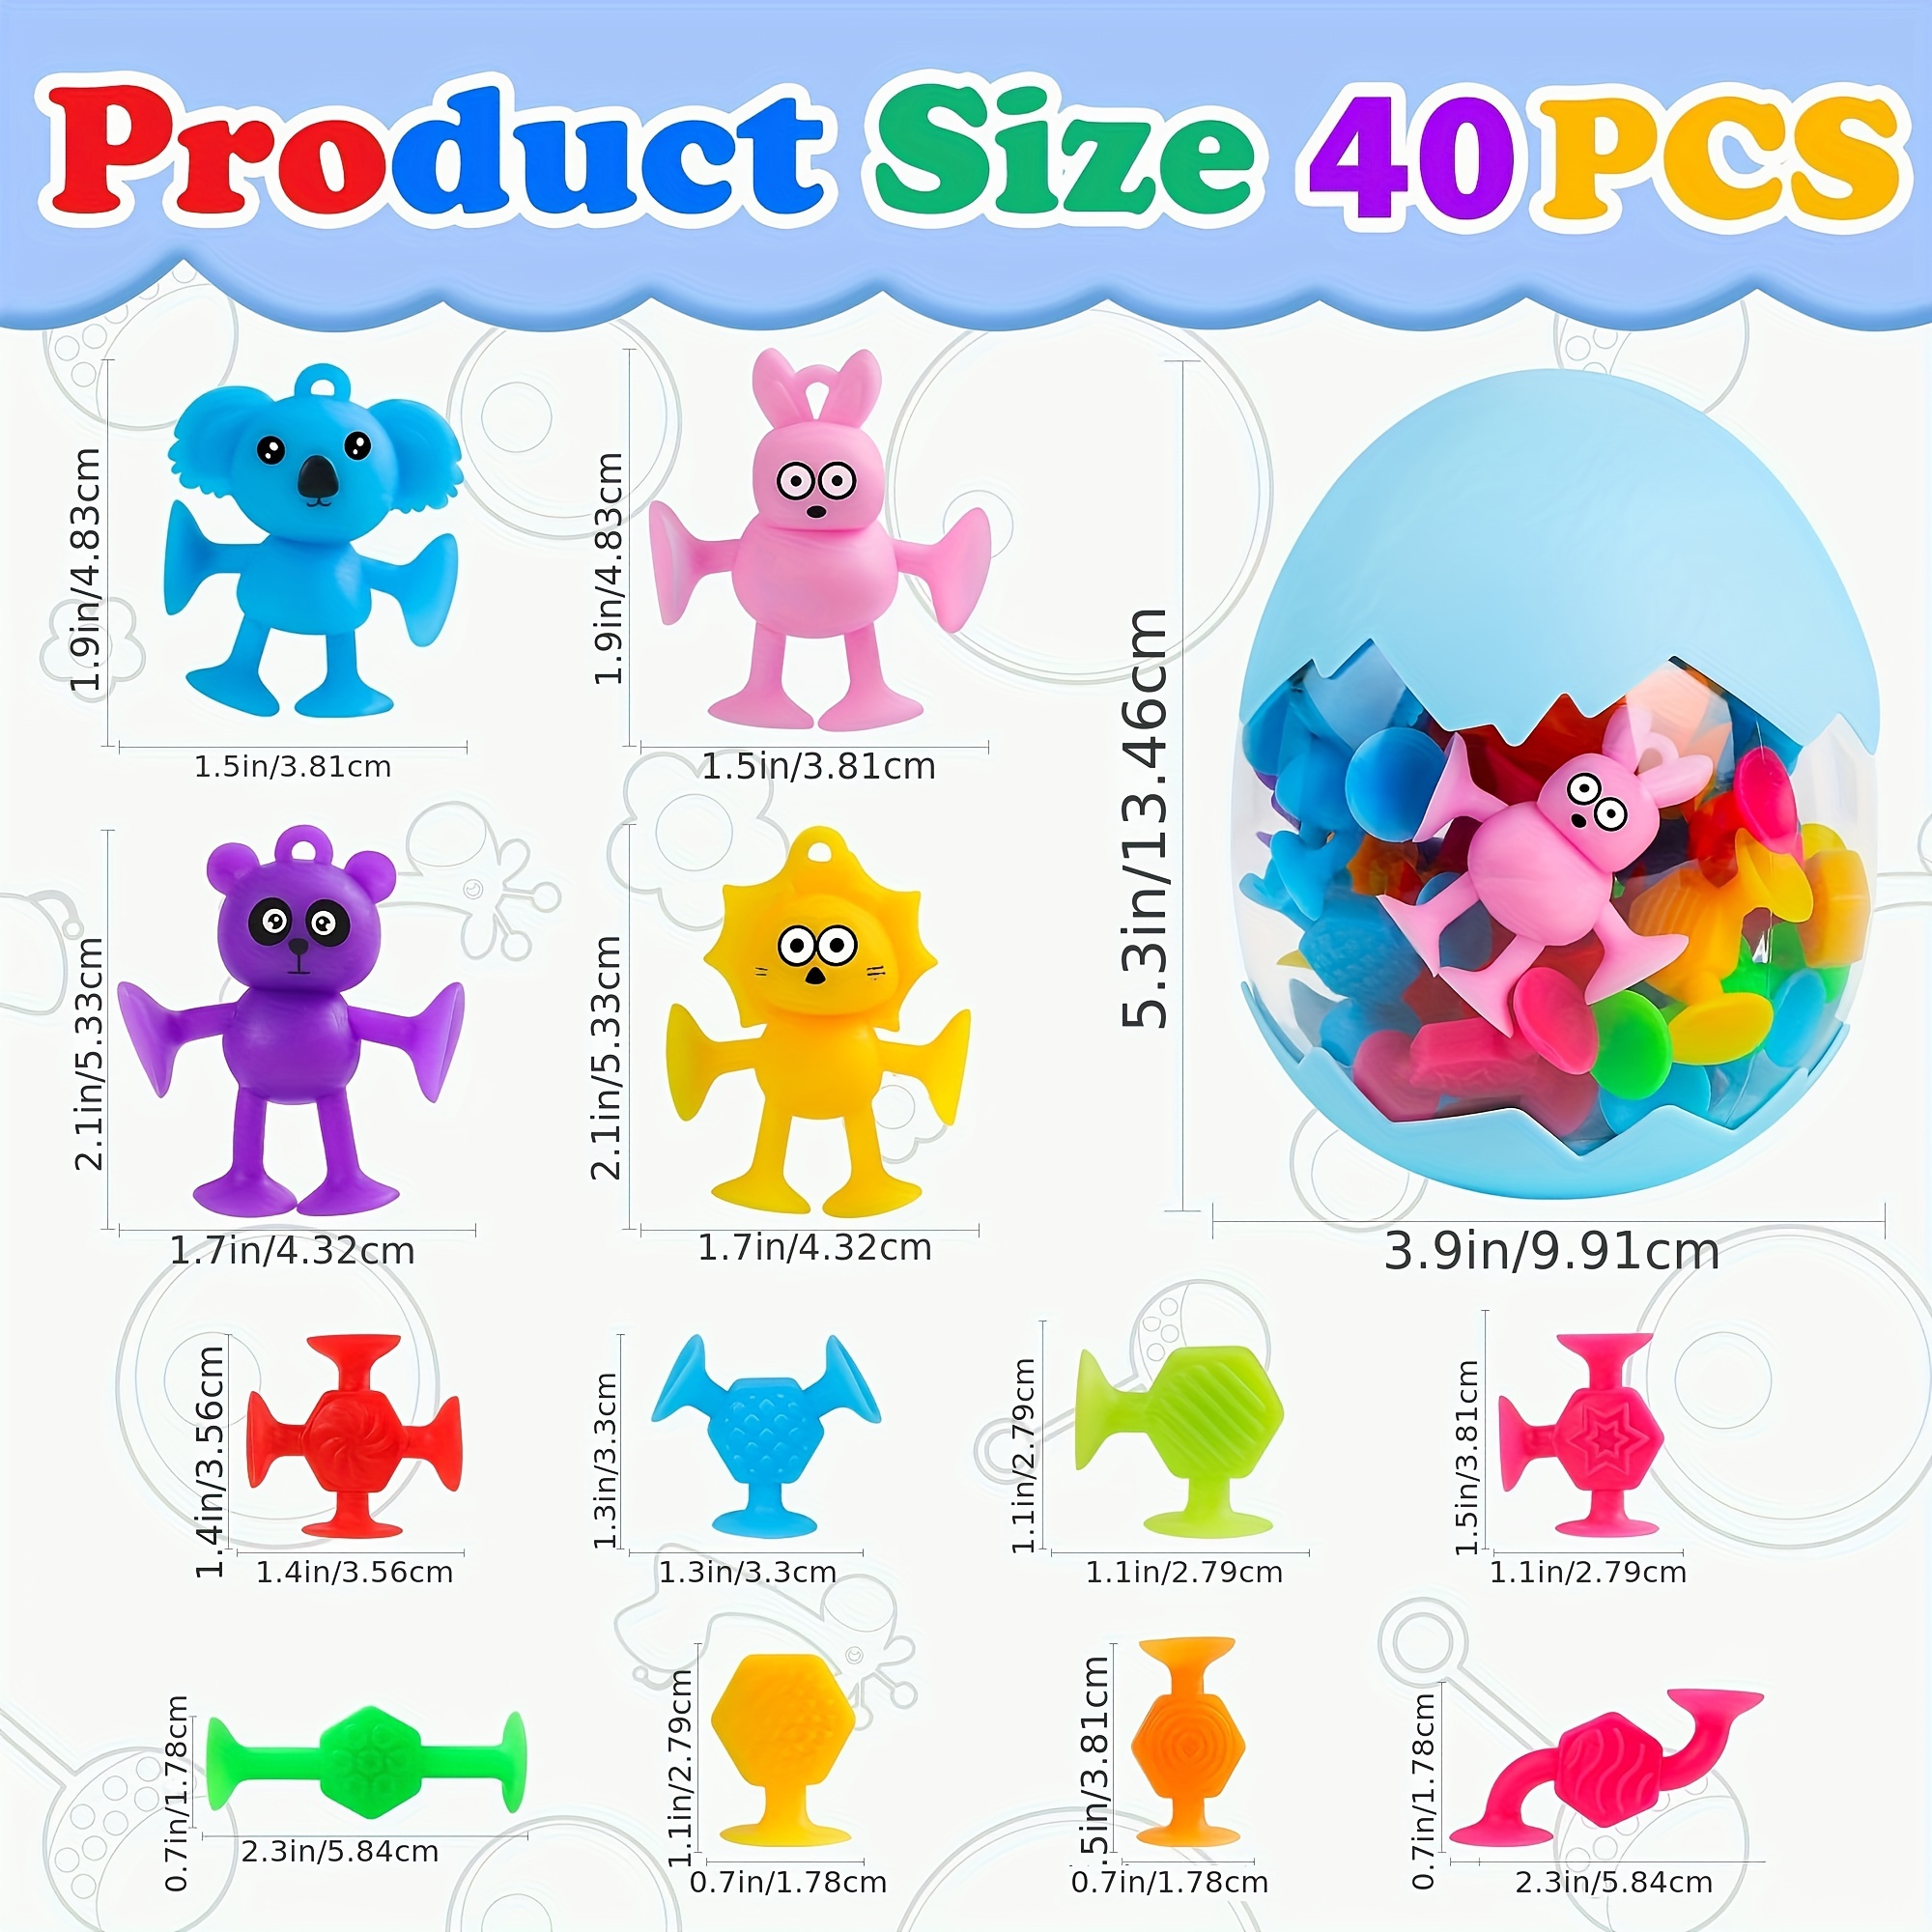 Baby Suction Cup Toys For Toddler Aged 3-5, Bath Toys For Kids Ages 4-8,  40PCS Ocean Sensory Toys With Mesh Bag Storage, Silicone Window Bathub  Travel Toys, Gift For Boys And Girls